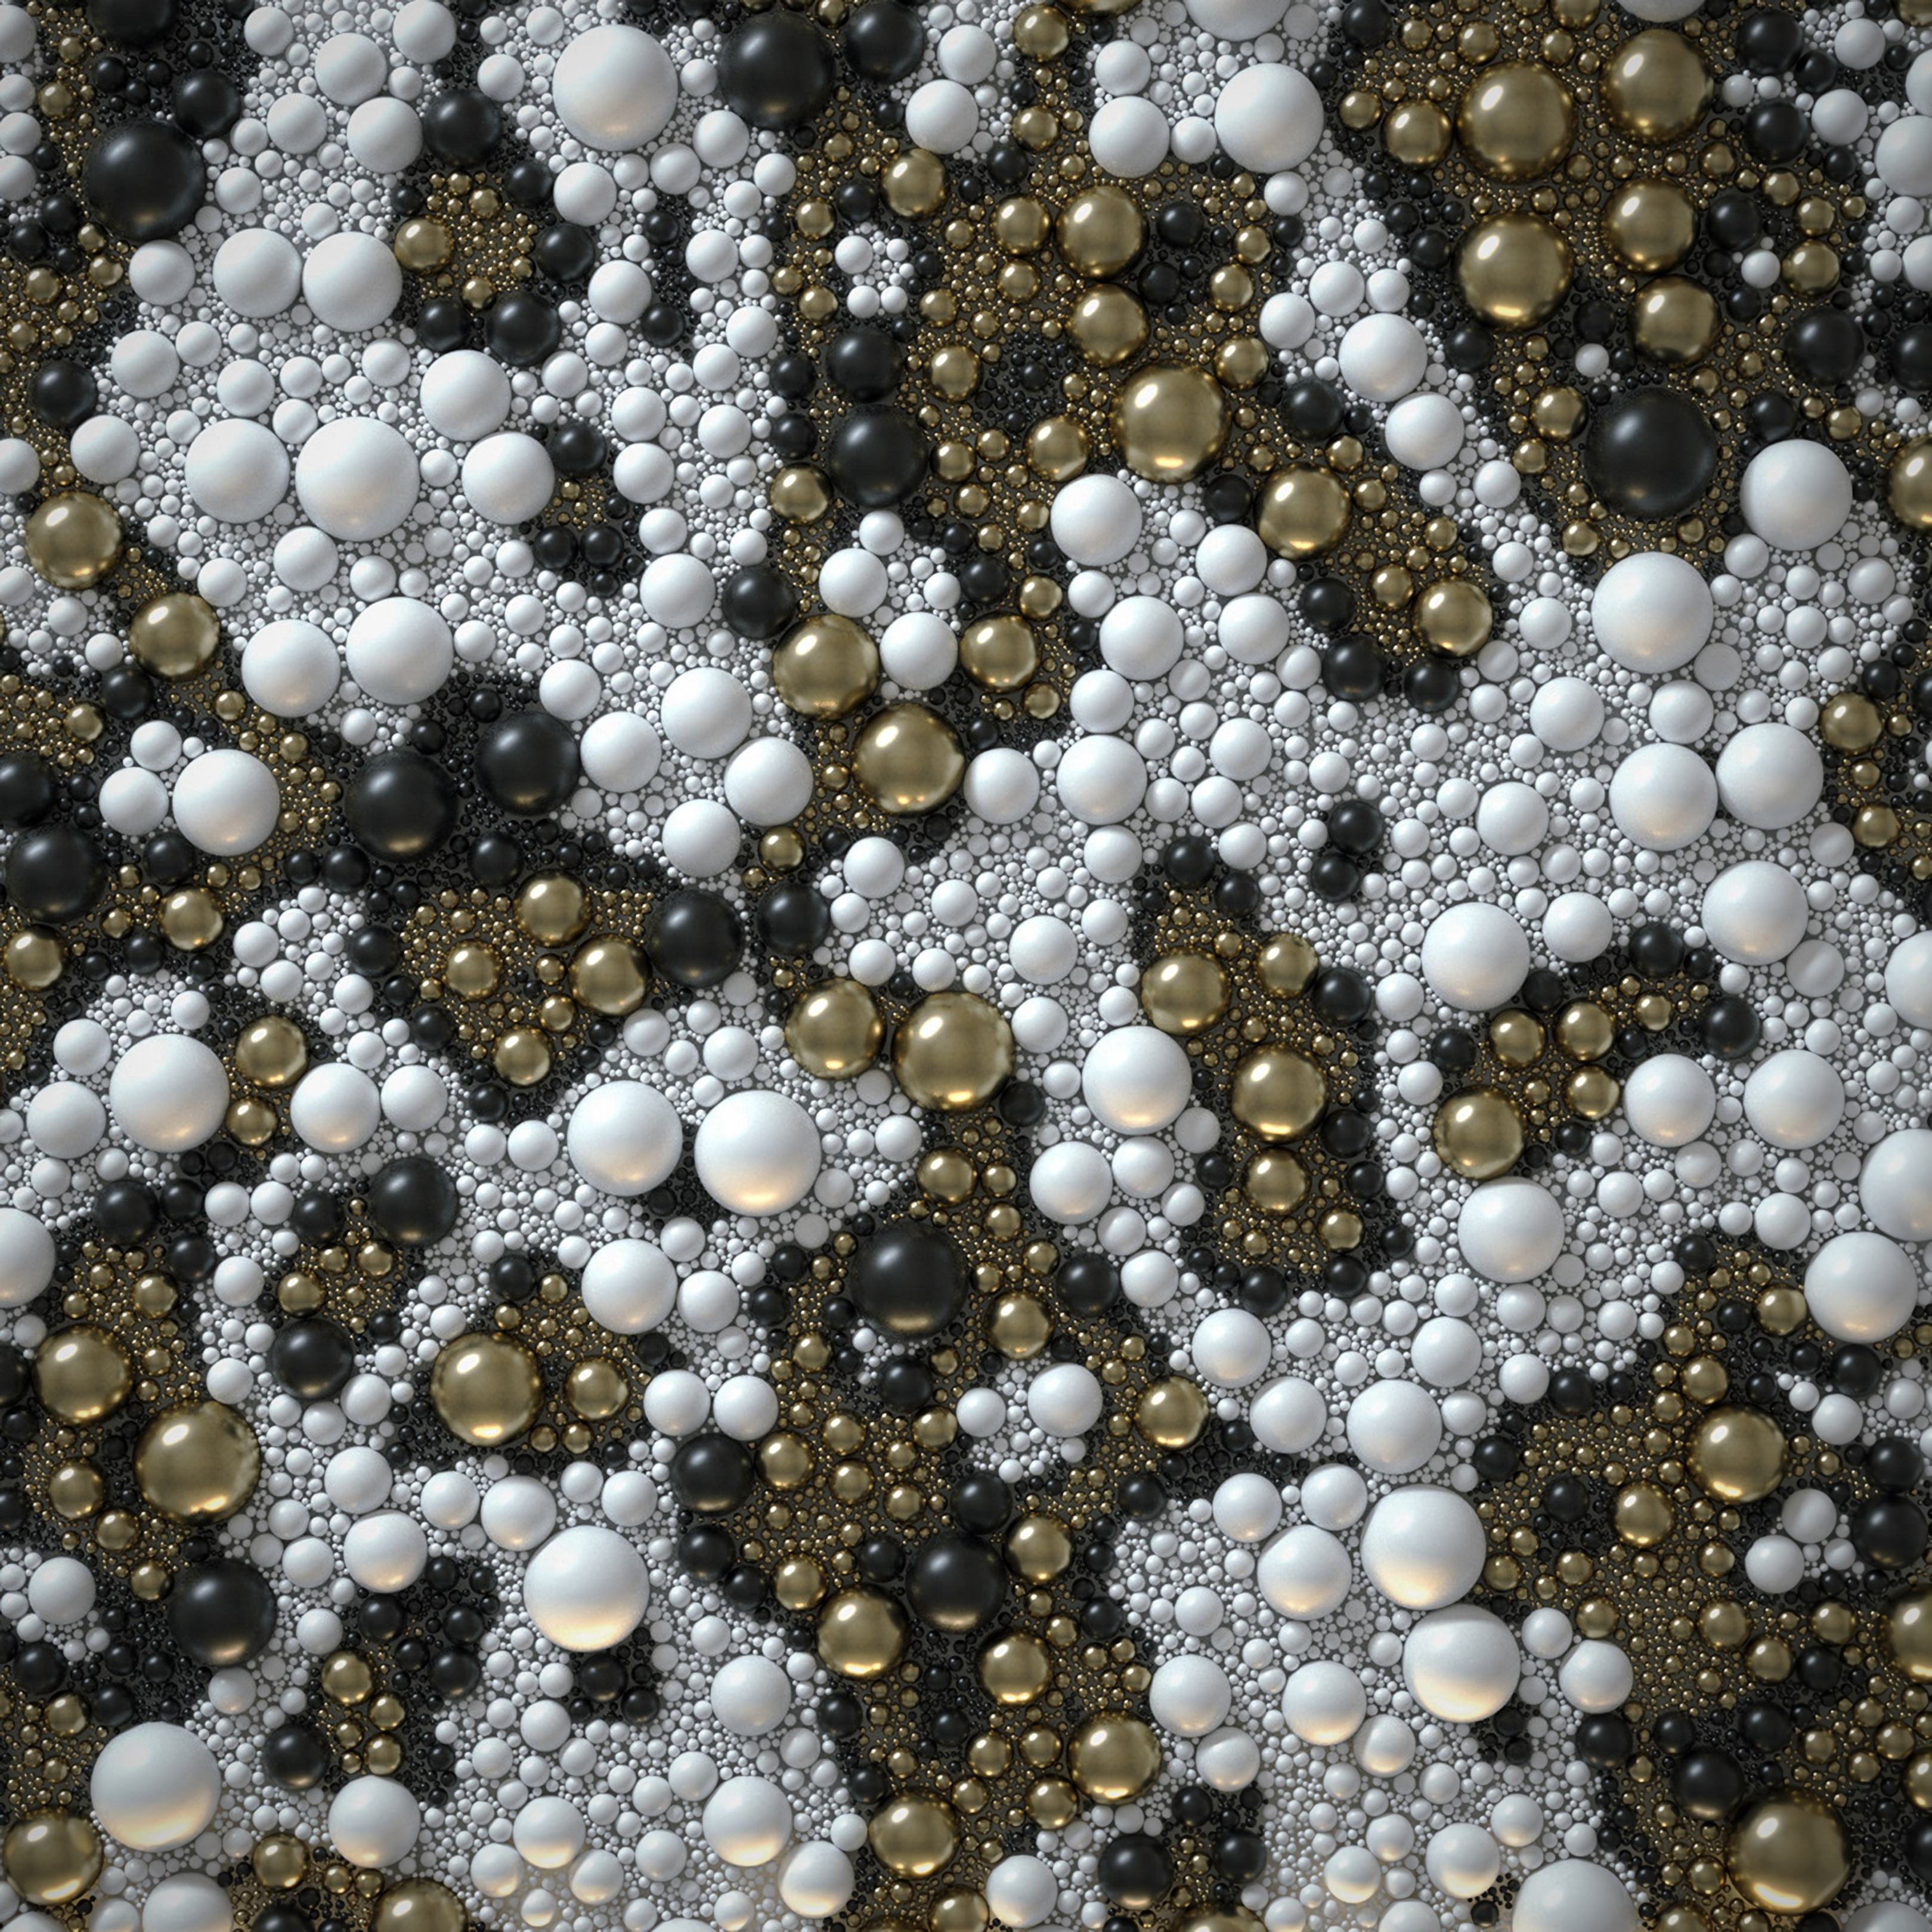 3d, balloons, texture, vesicular, textures, multicolored, motley, taw, bubbly iphone wallpaper